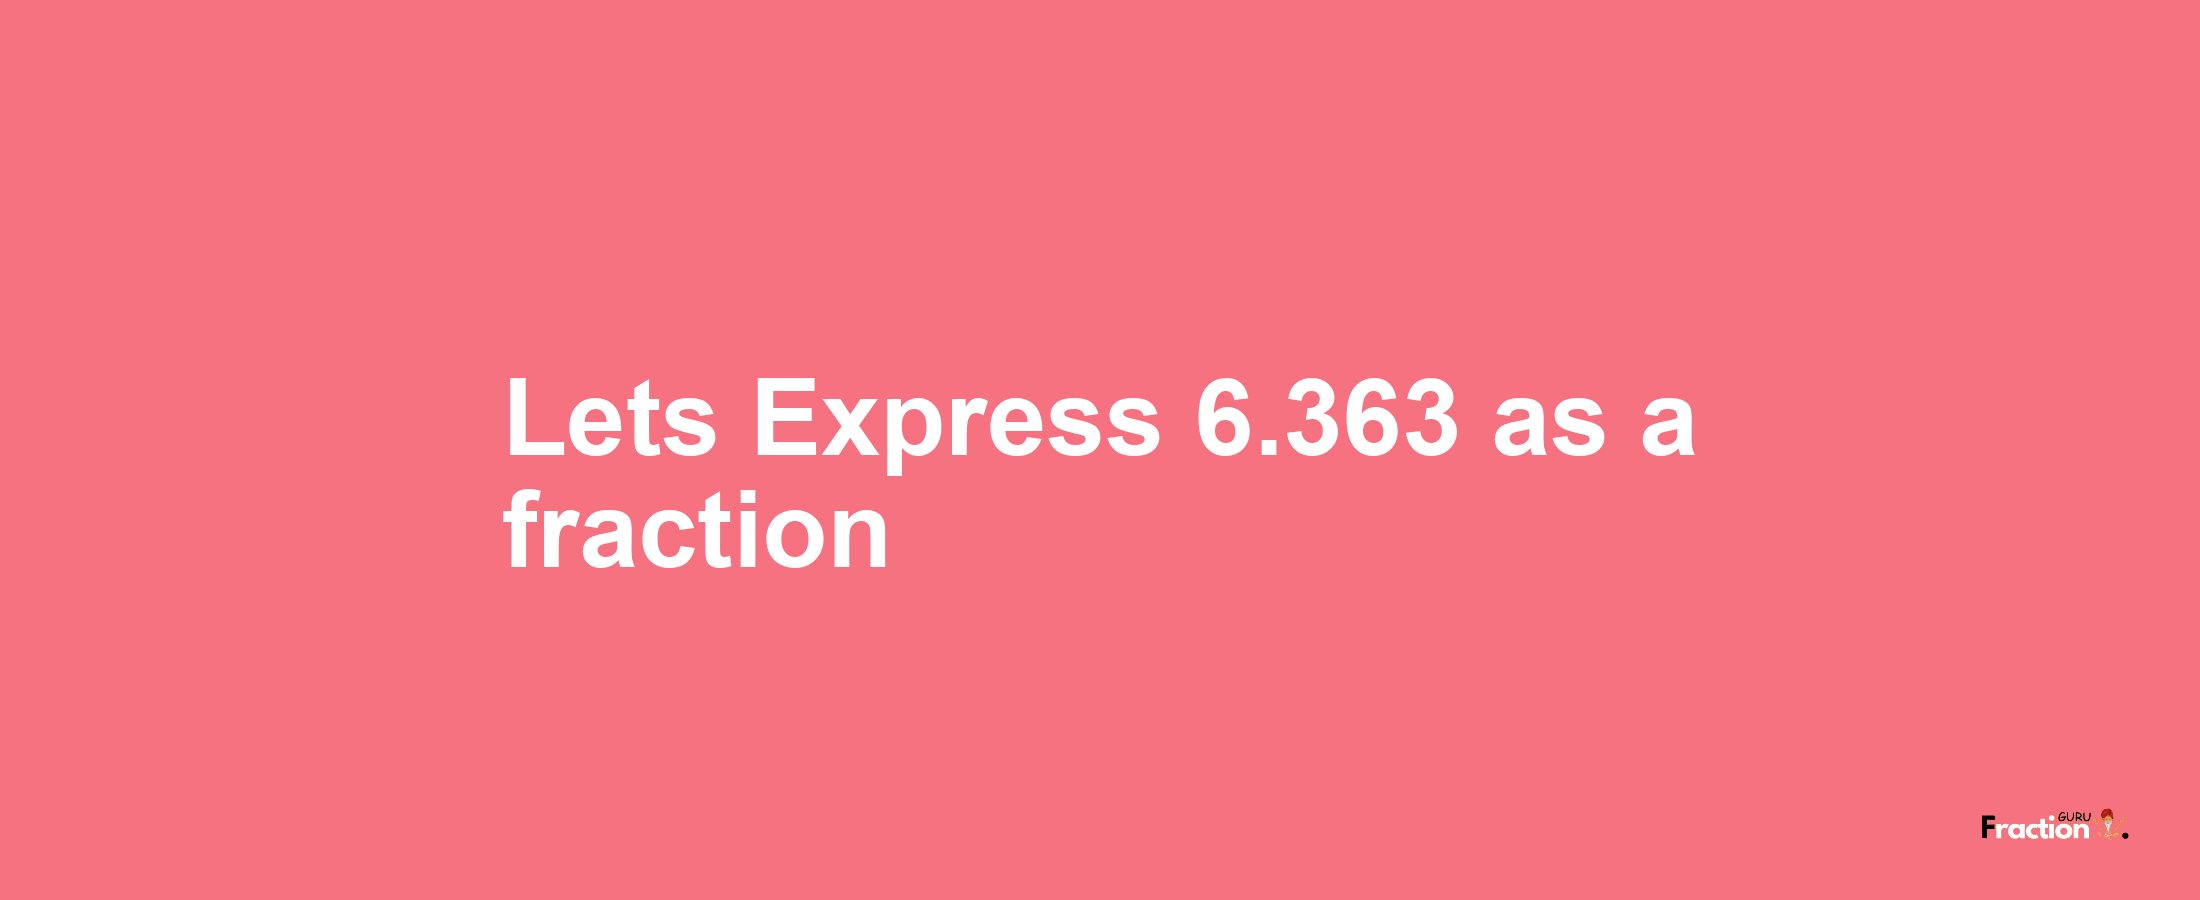 Lets Express 6.363 as afraction